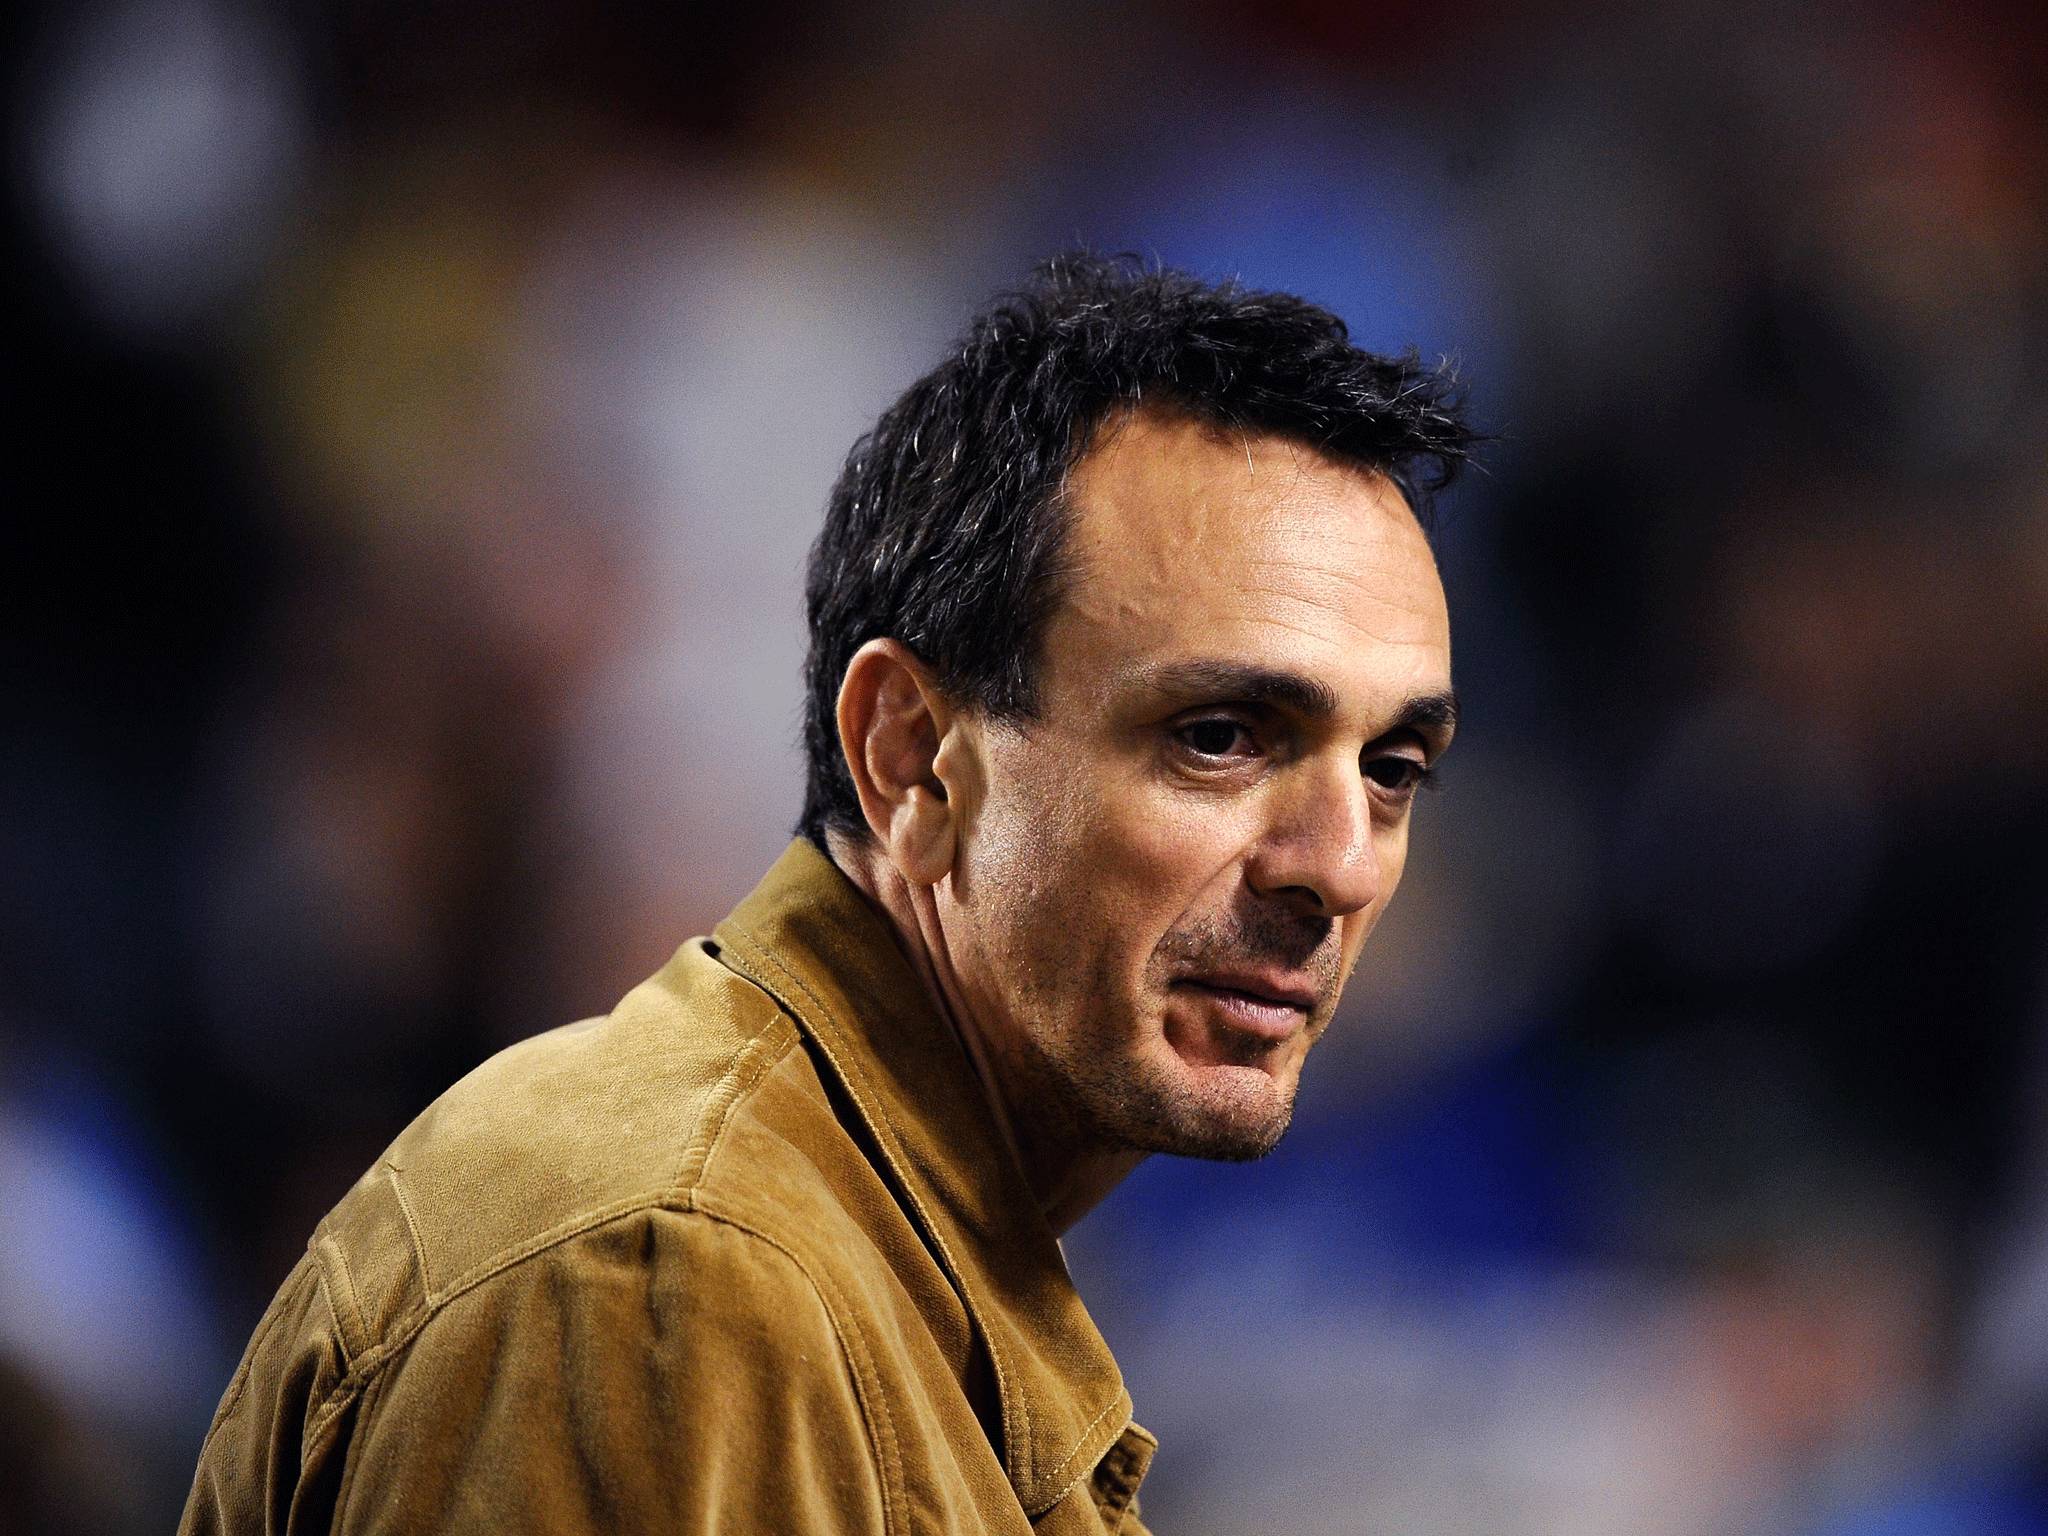 Hank Azaria voices Moe, Apu, Snake and more (Picture: Getty)